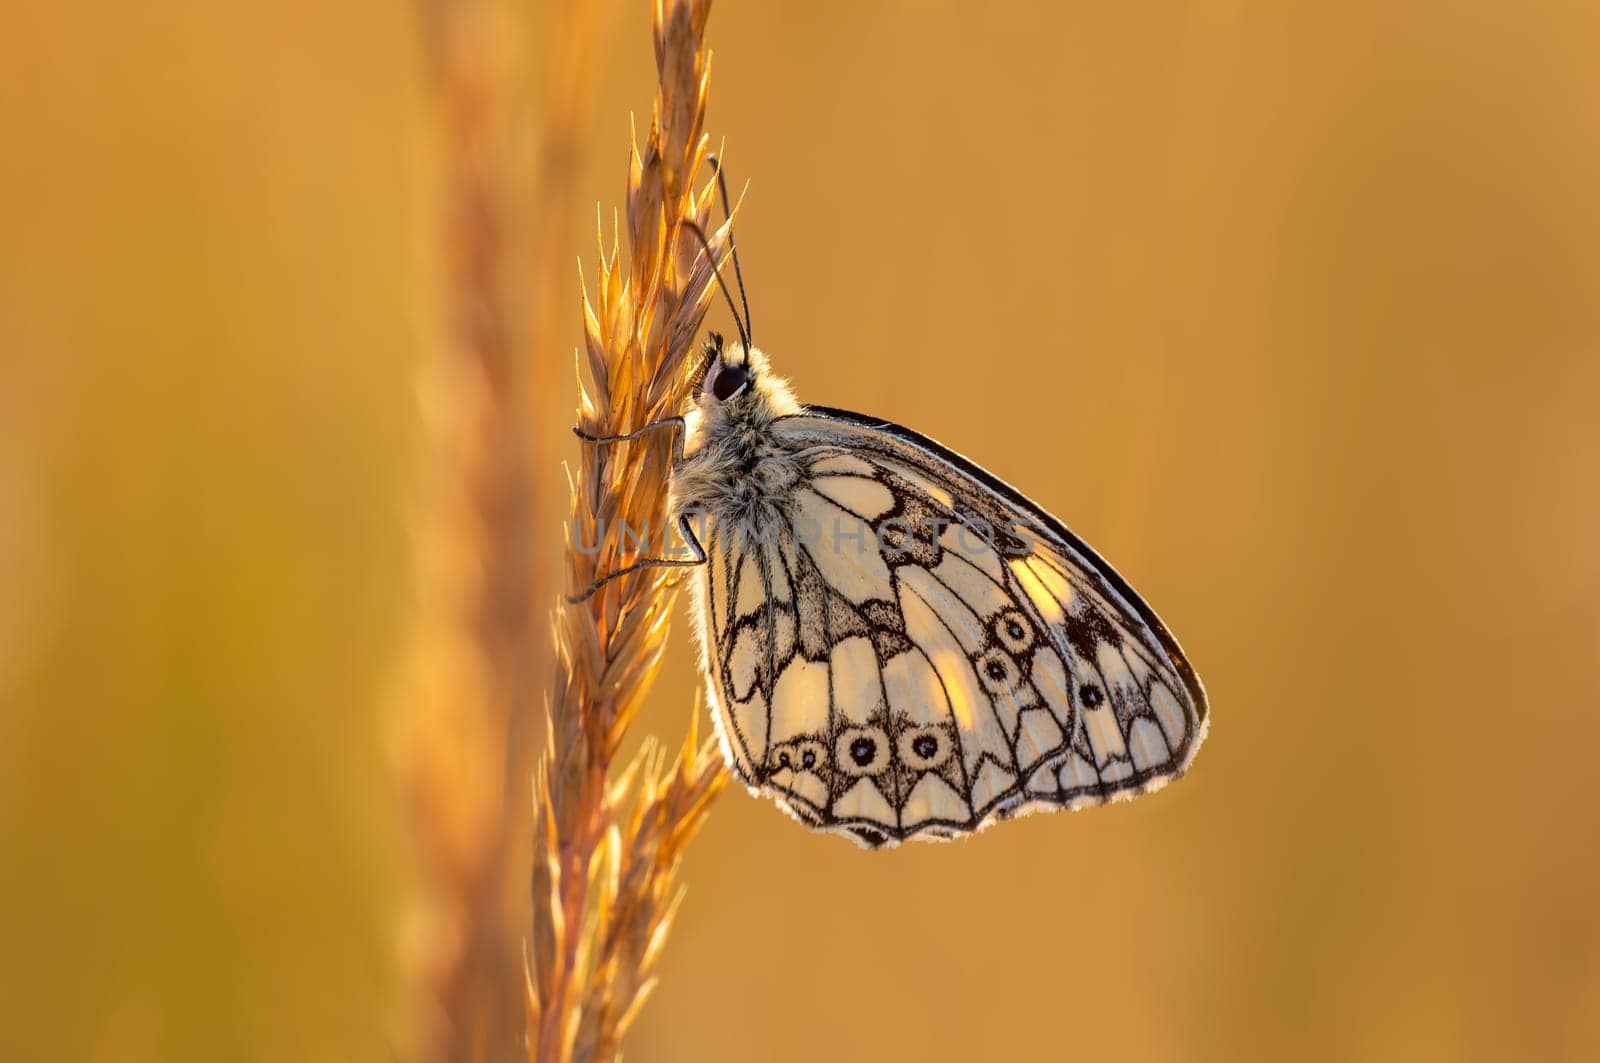 butterfly sits on a wheat ear by mario_plechaty_photography